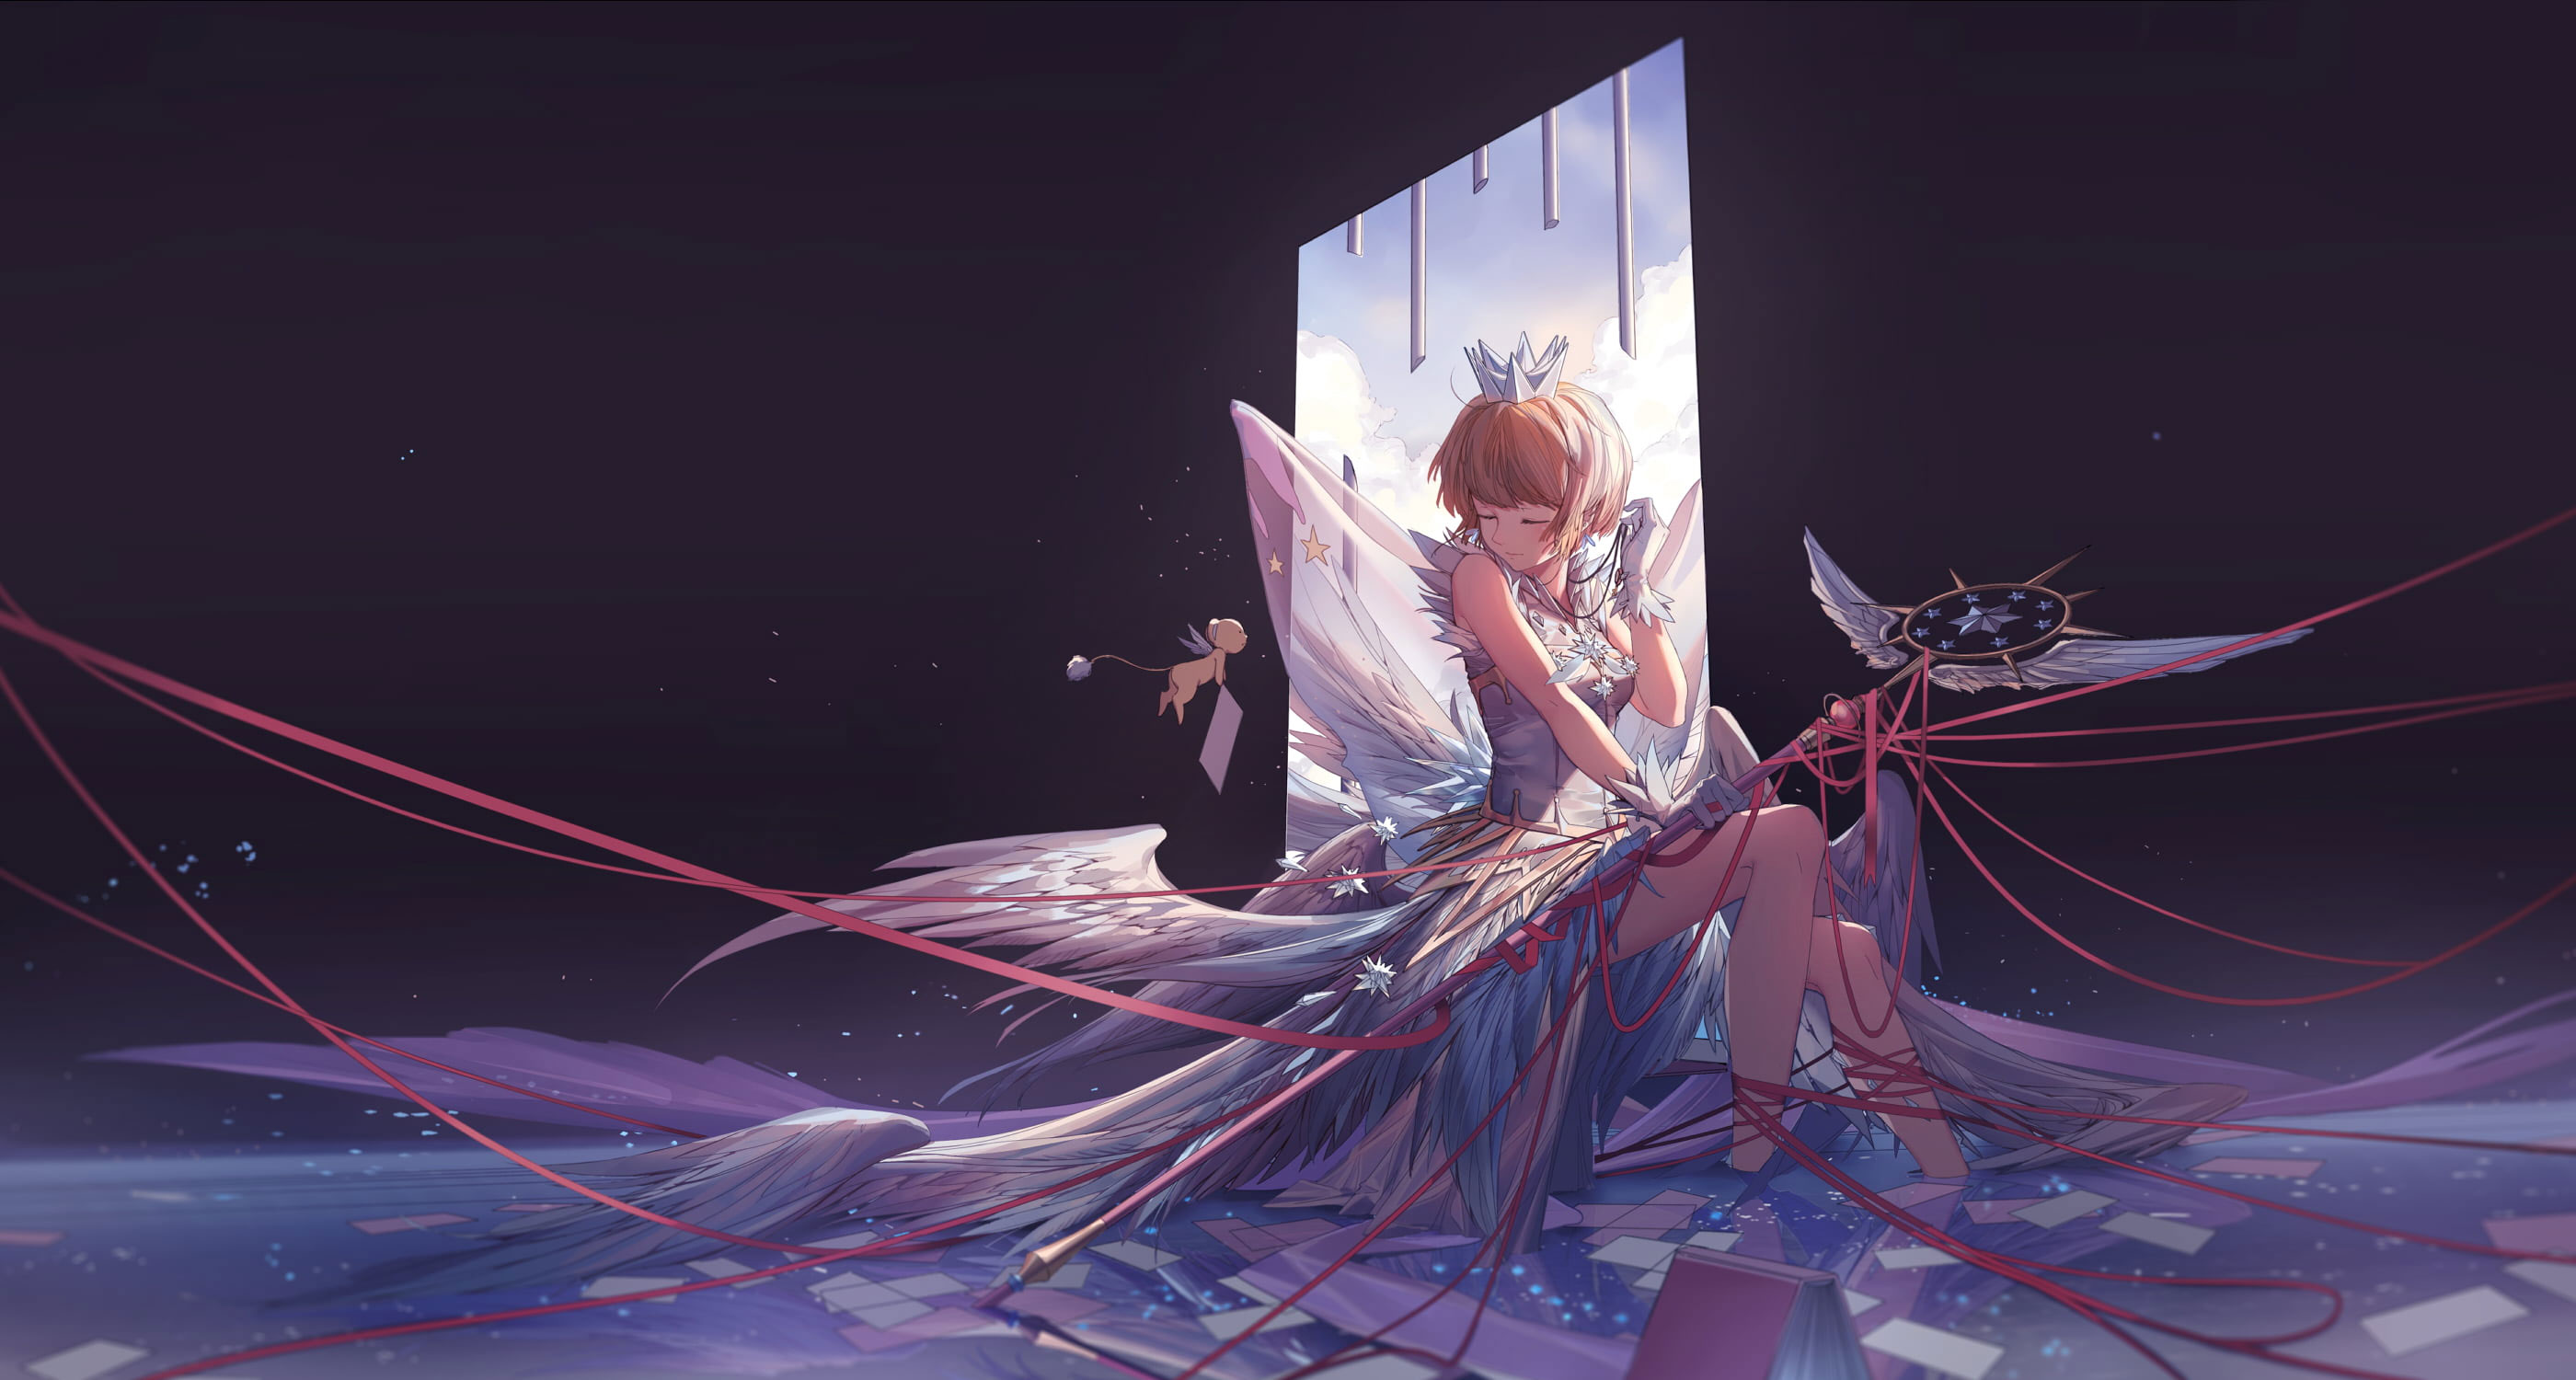 Wallpaper Woman In White Dress With Wings Anime